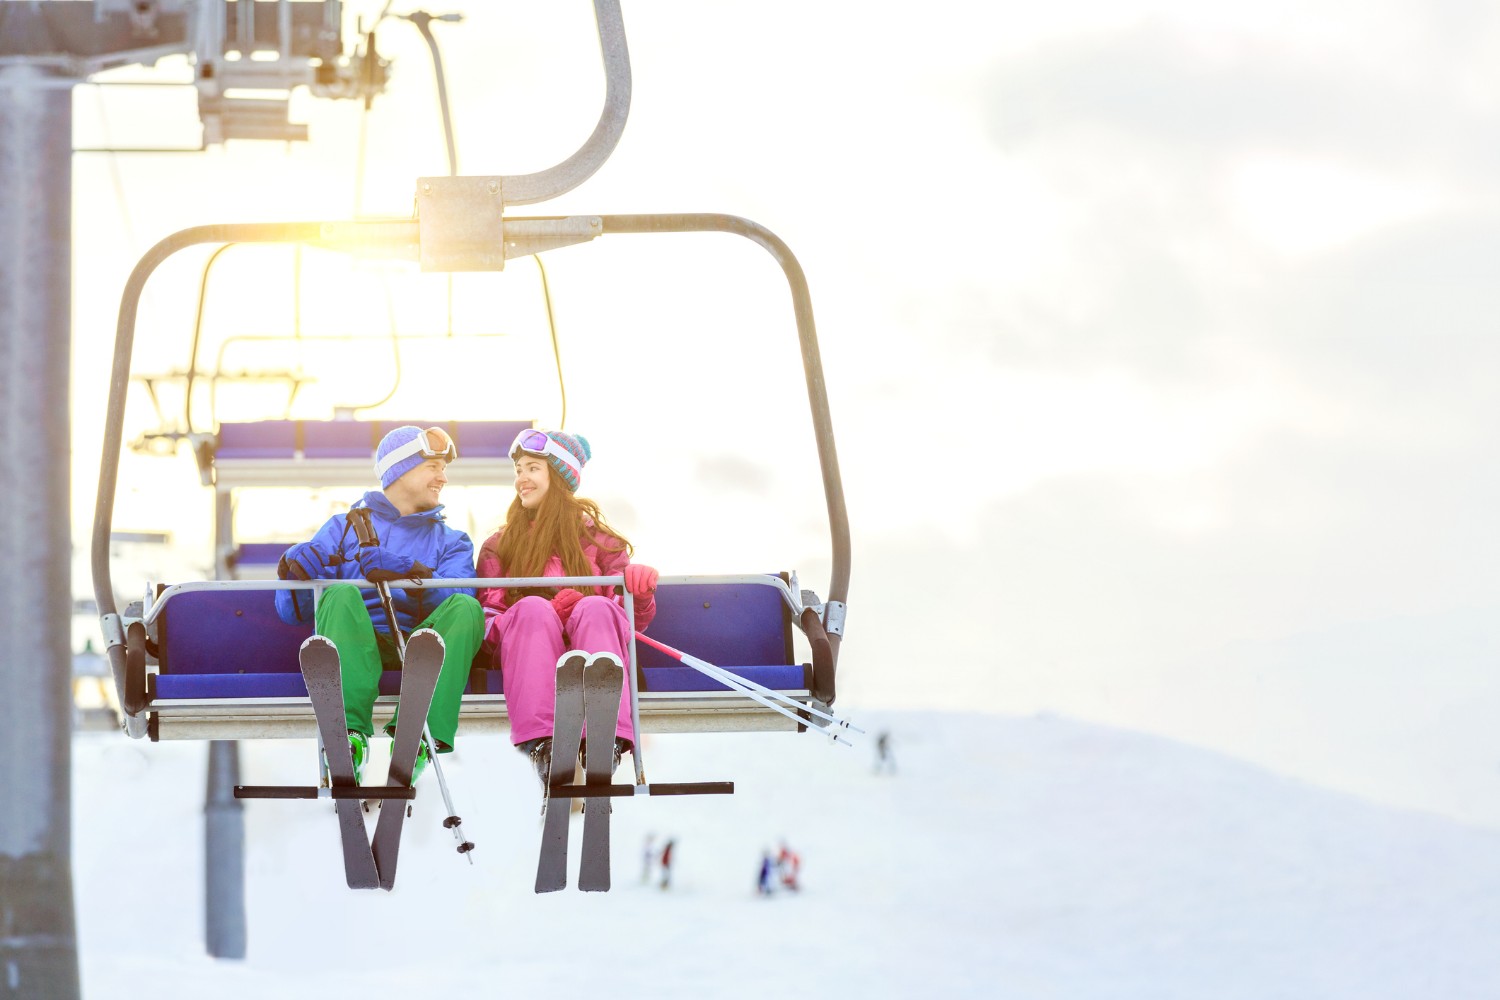 People on a ski lift during a February trip to the East Coast